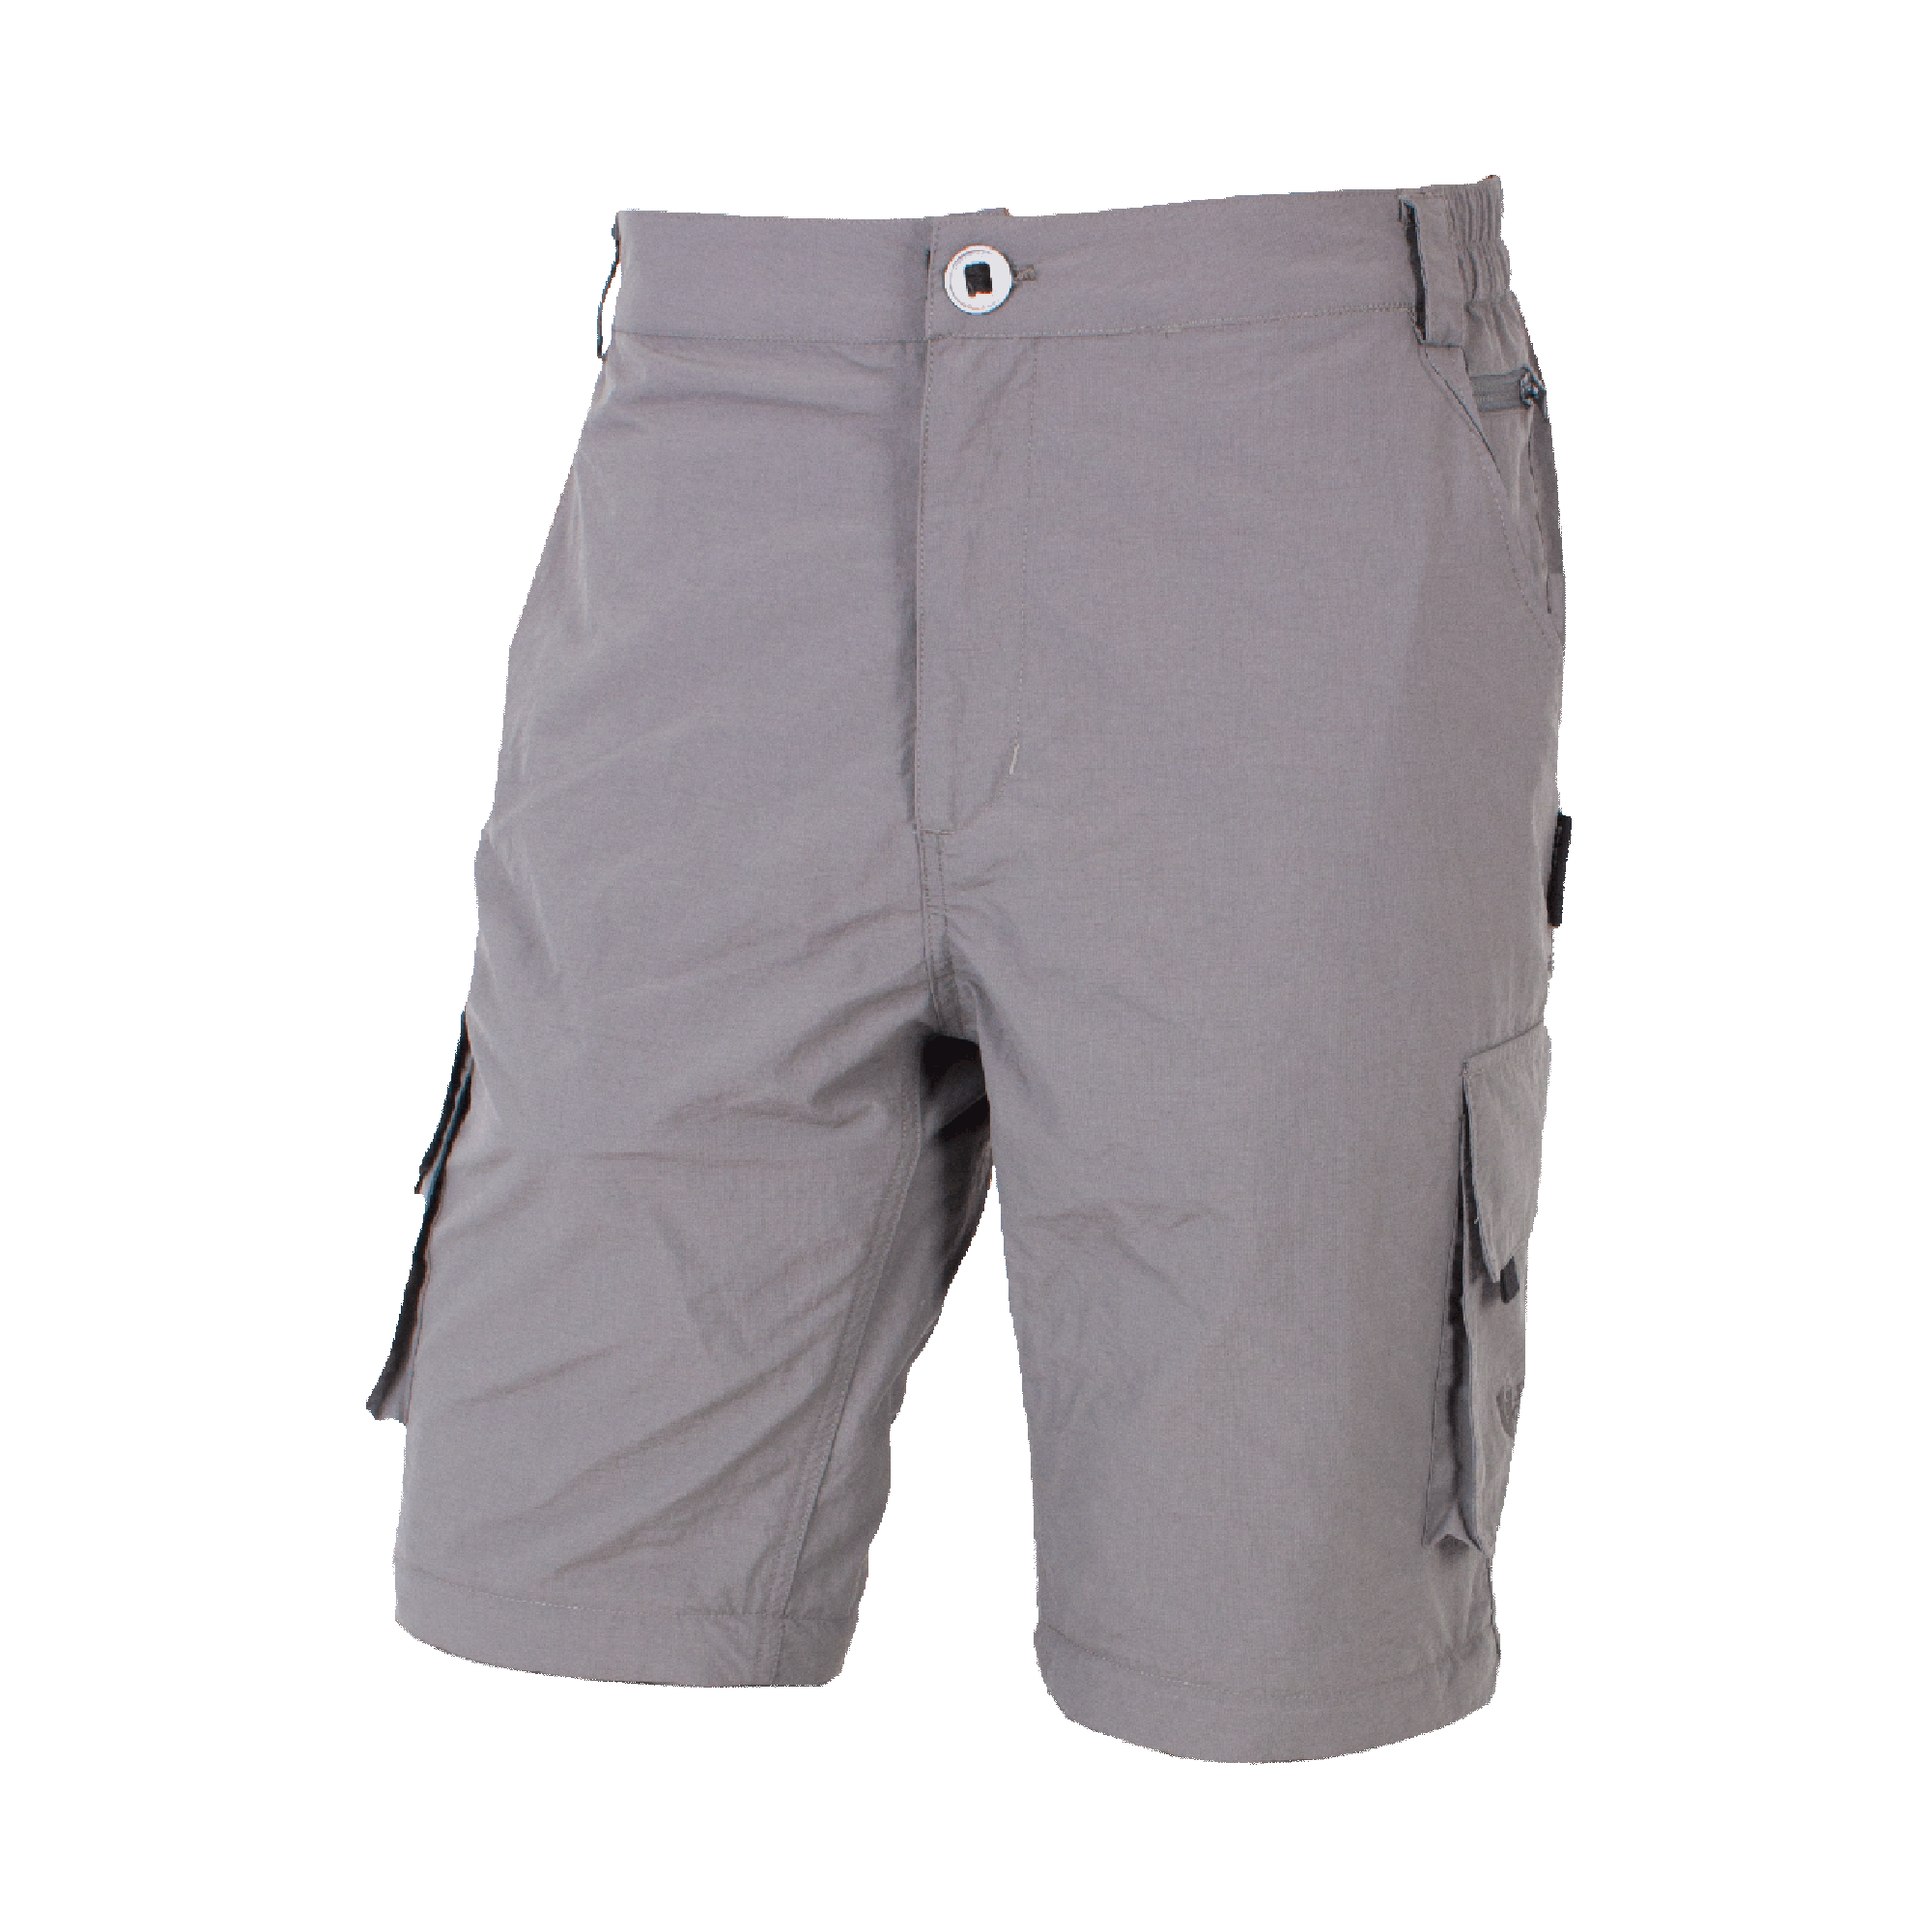 Fast Cast Convertible Trousers